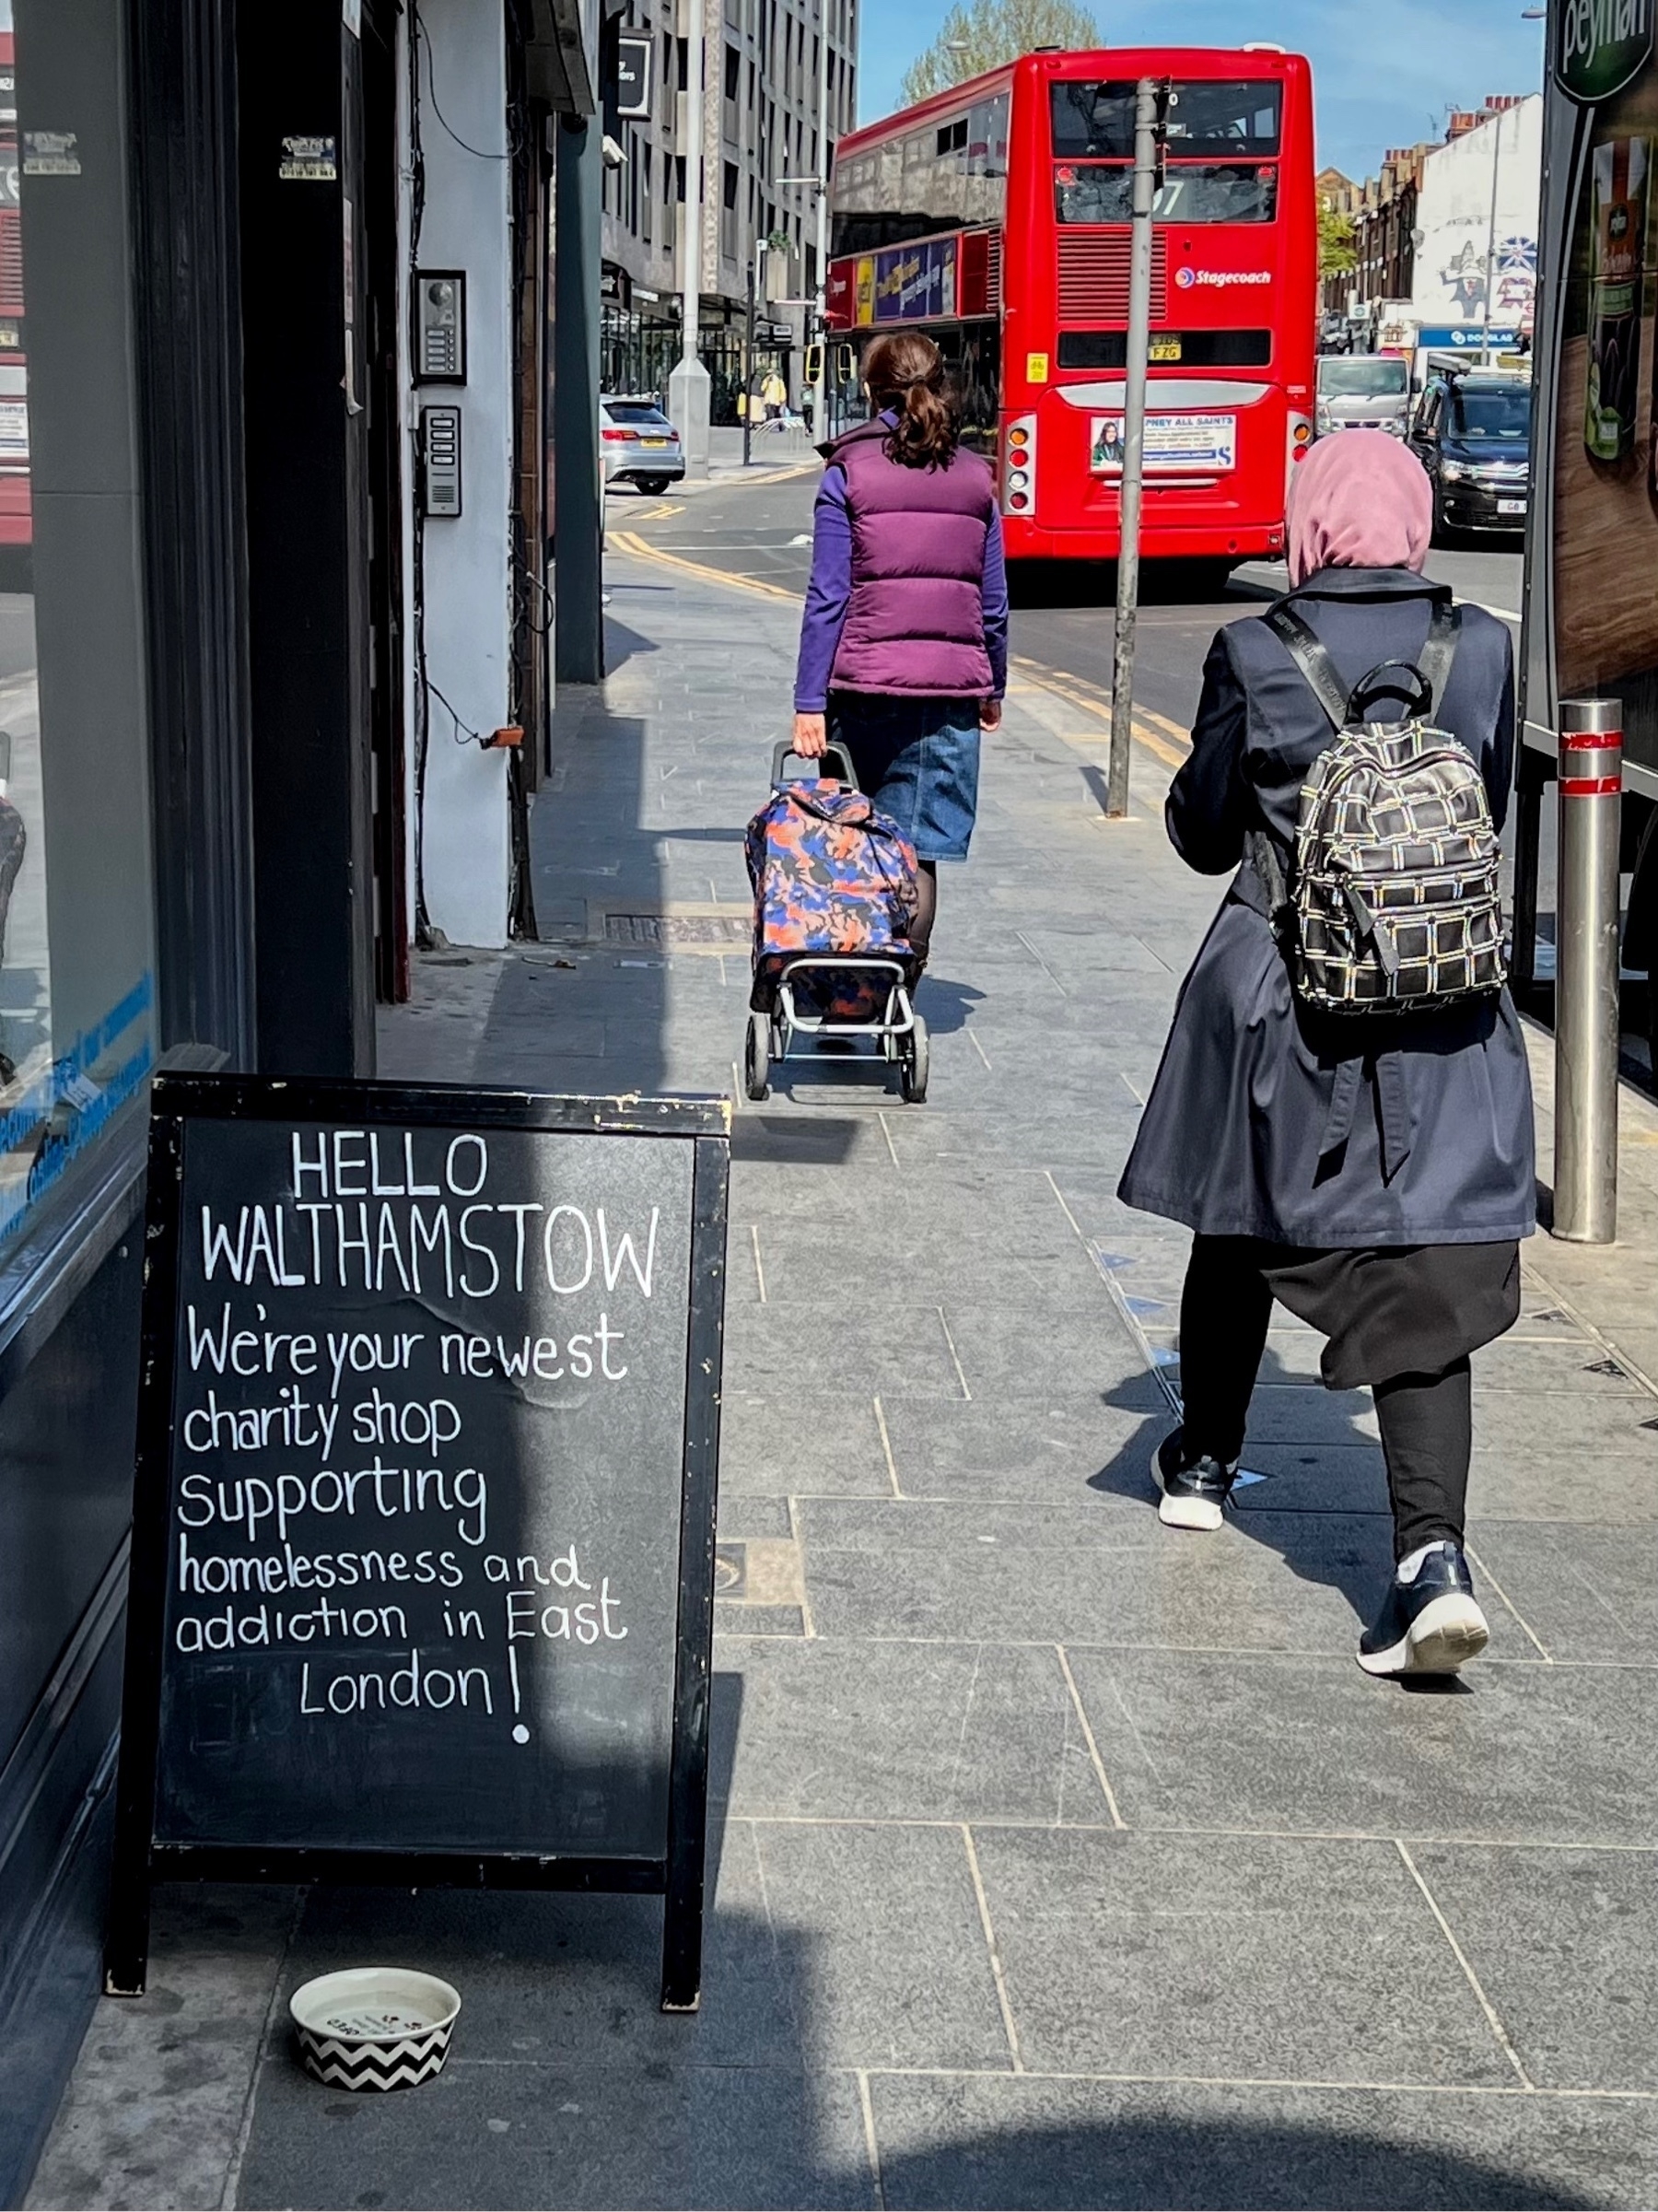 Shop sign saying "we're your bewest charity shop supporting addiction and homelessness".